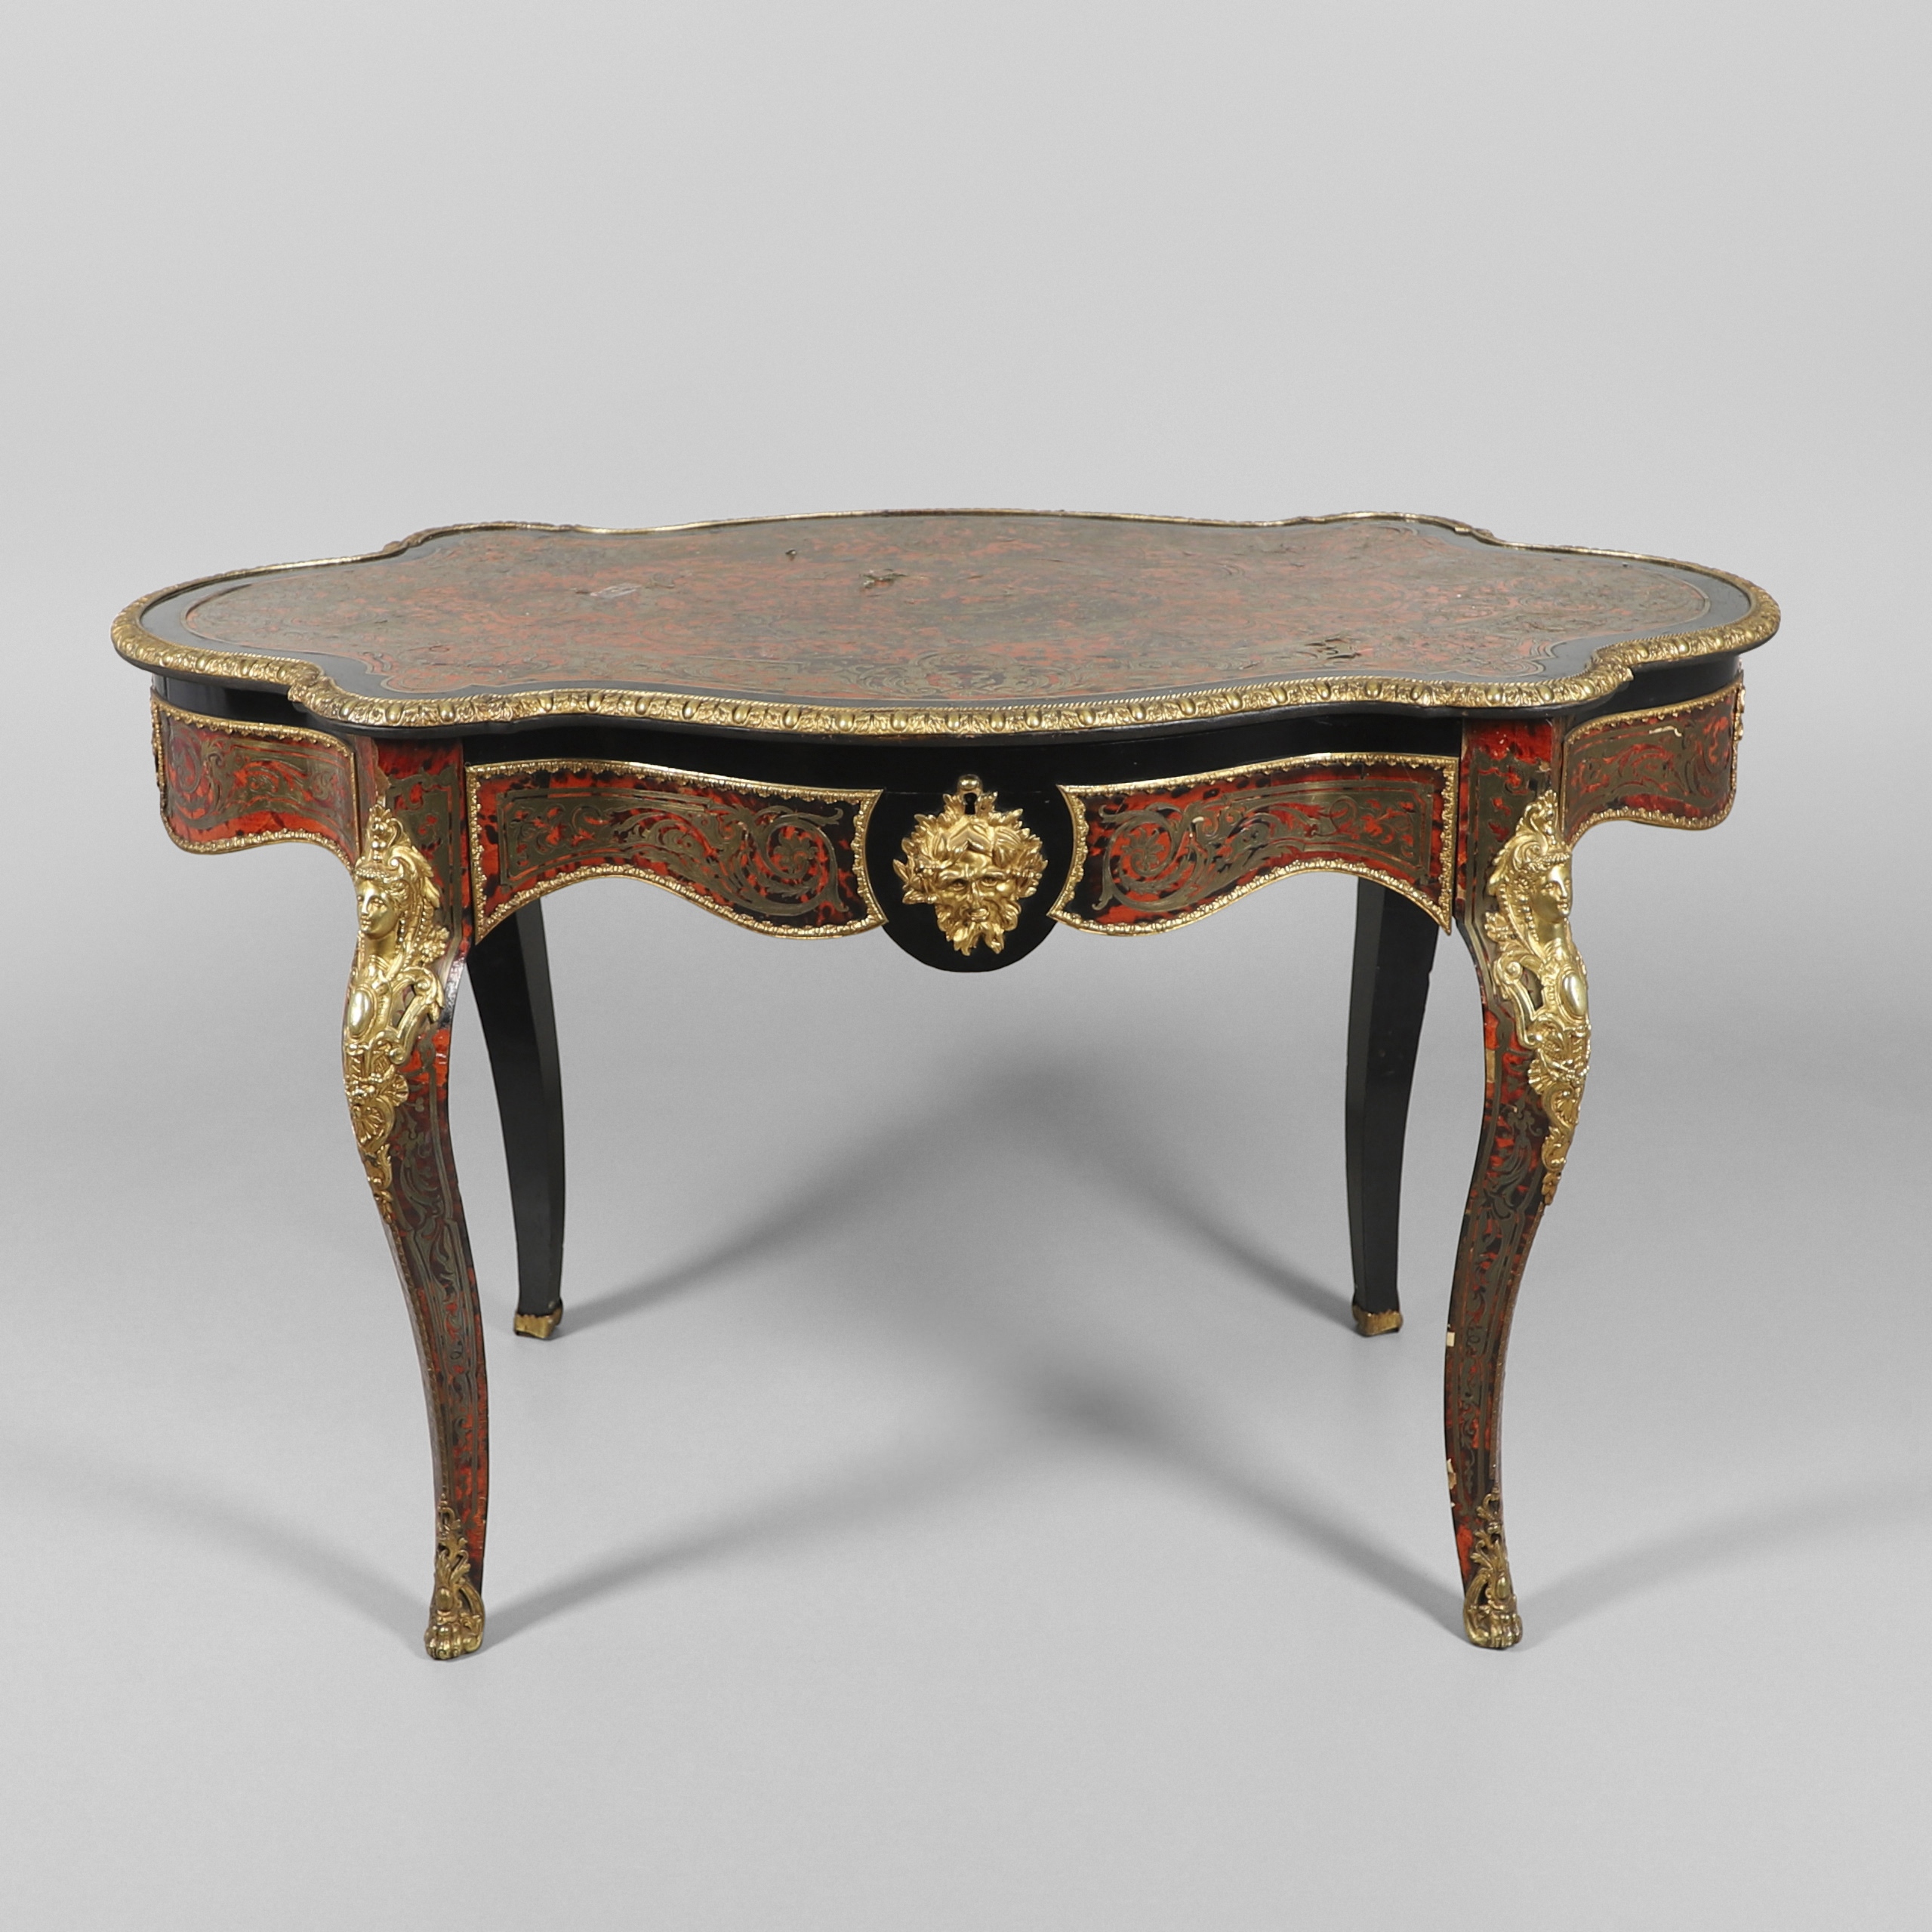 A 19TH CENTURY FRENCH BOULLE CENTRE TABLE.